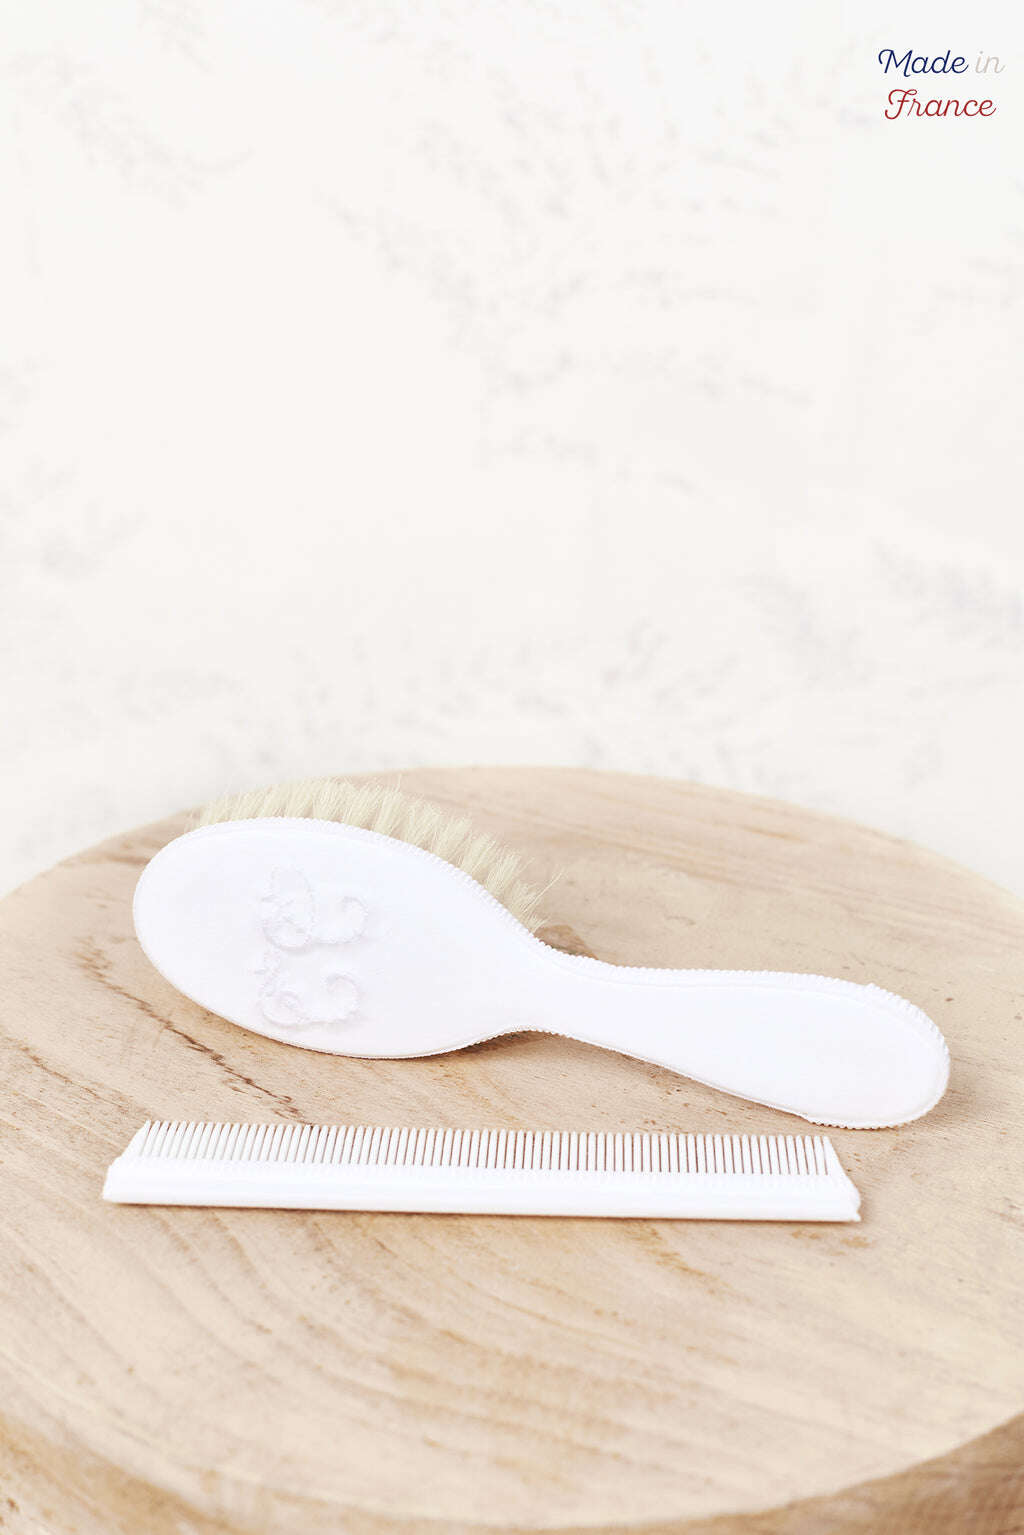 Brosse & Peigne - Monogramme Made In France